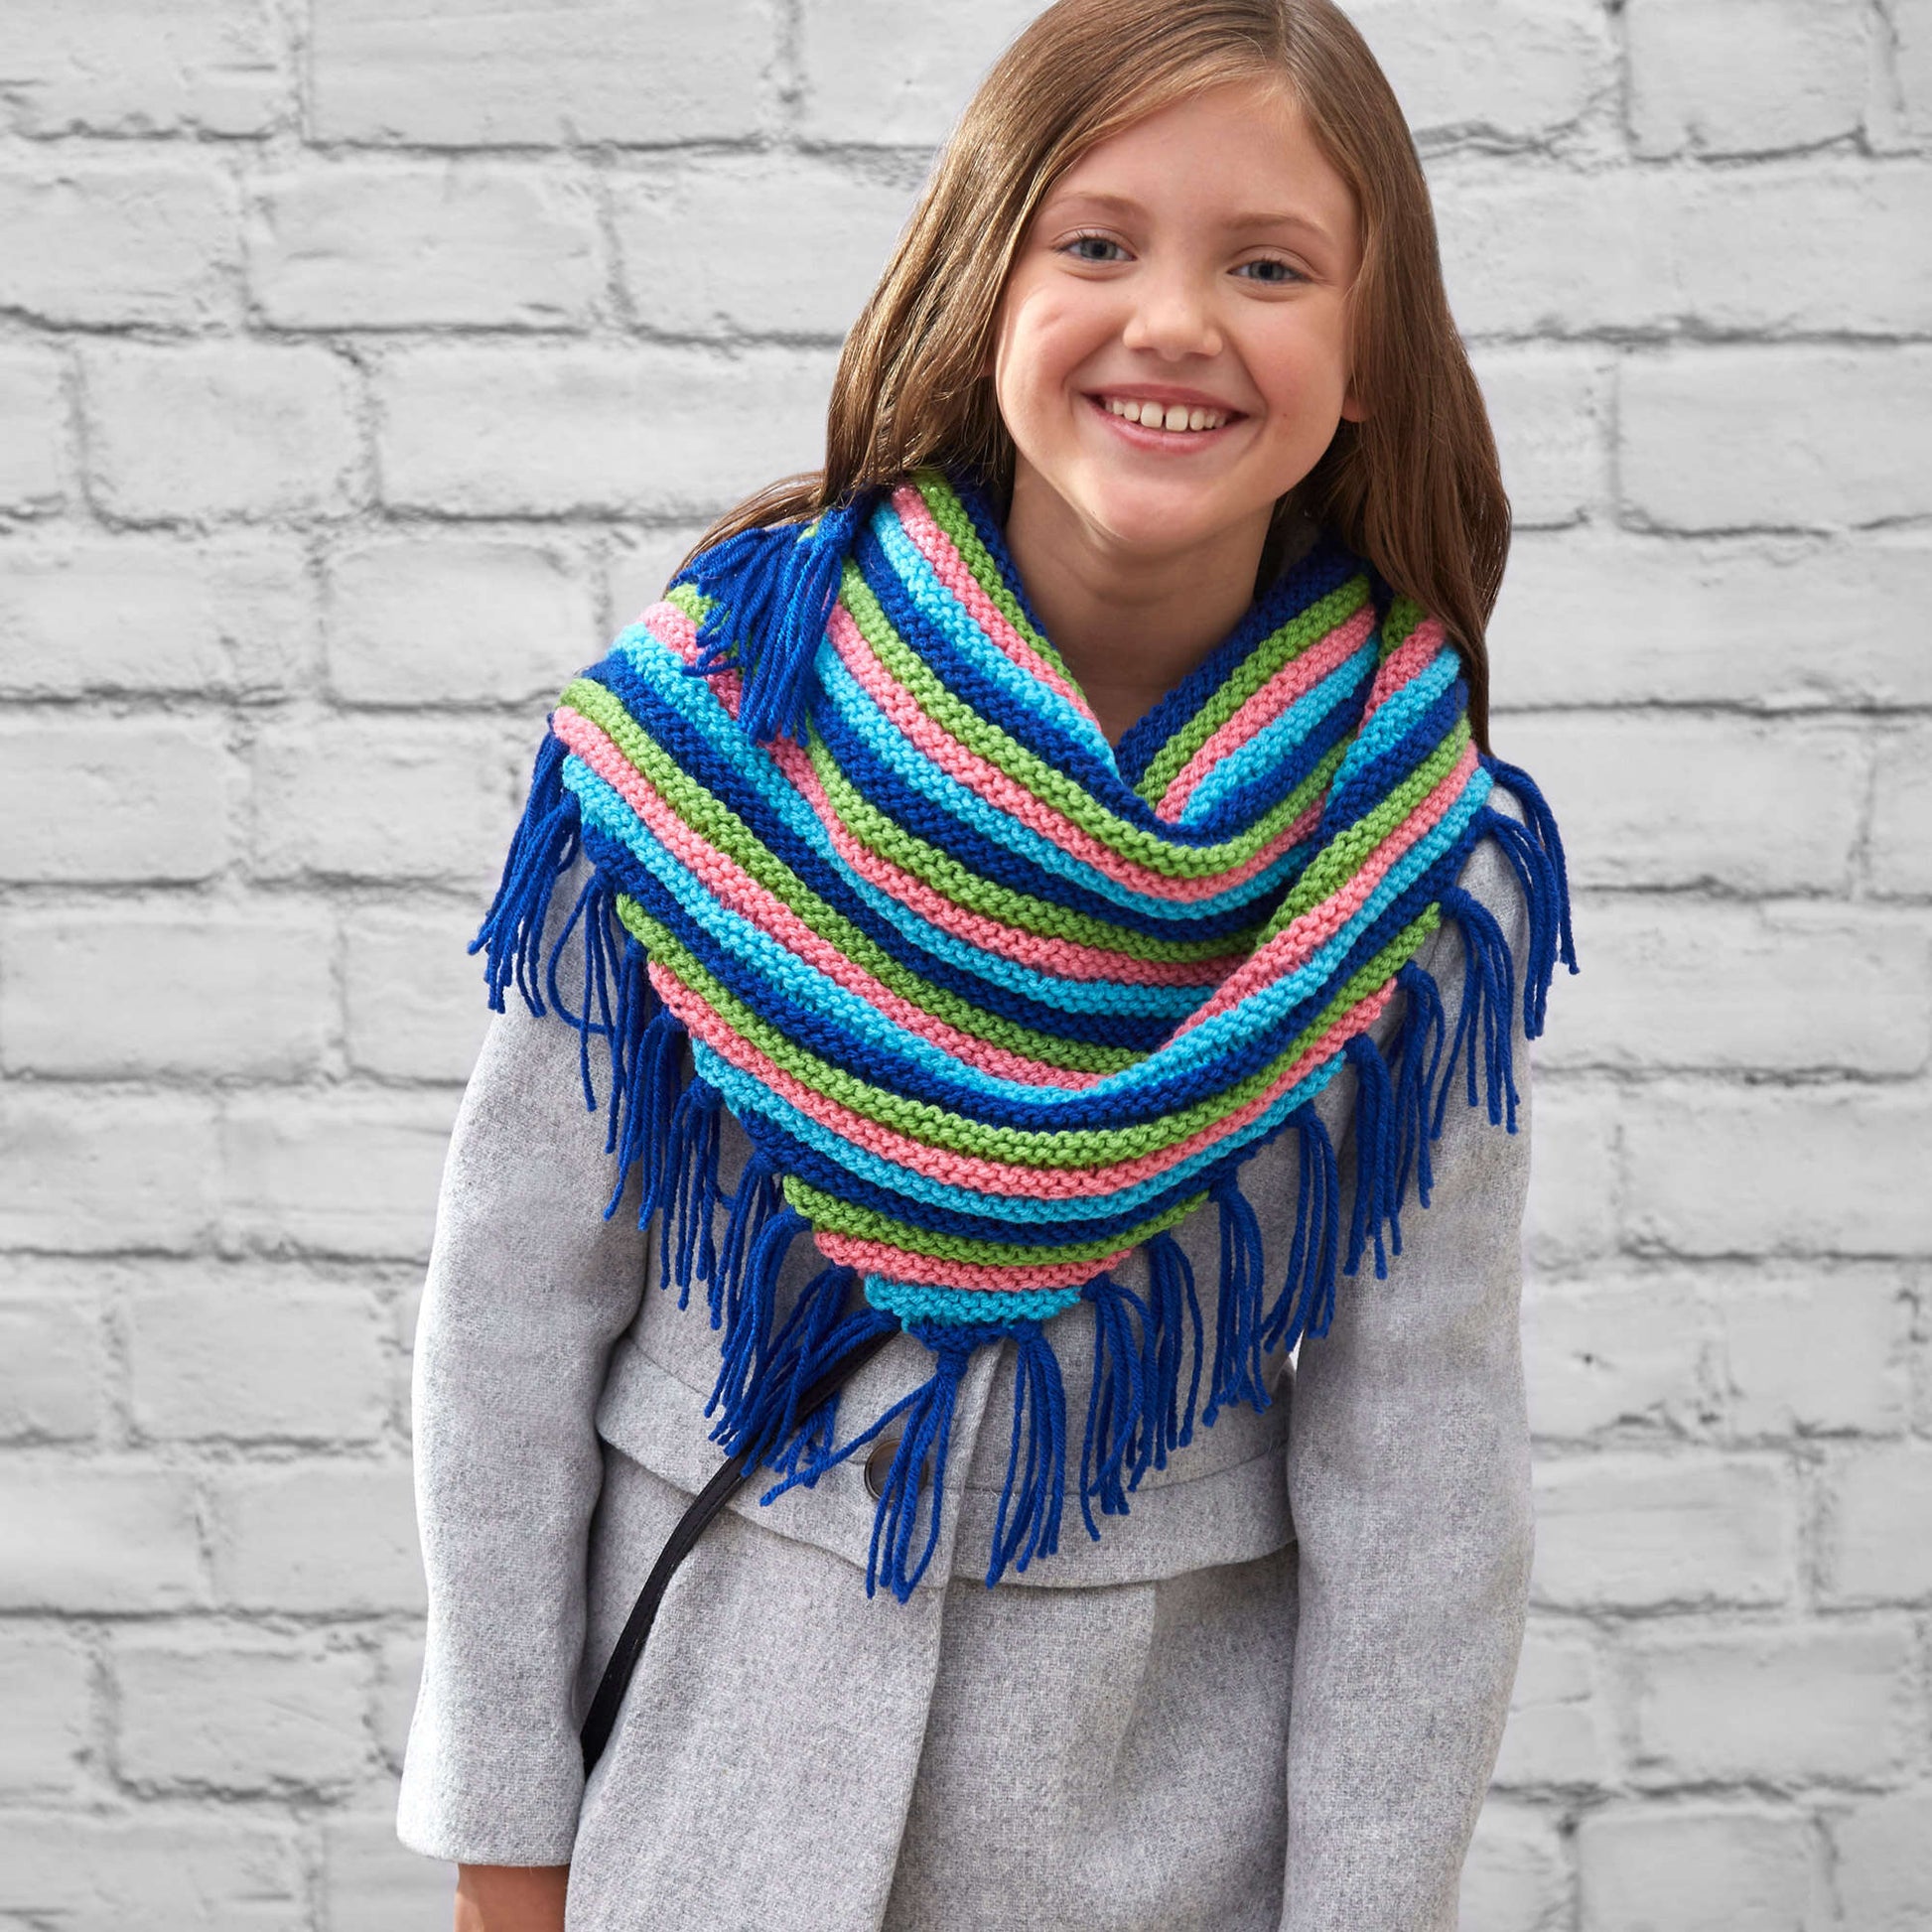 Free Red Heart Girls' Fringed Scarf Knit Pattern